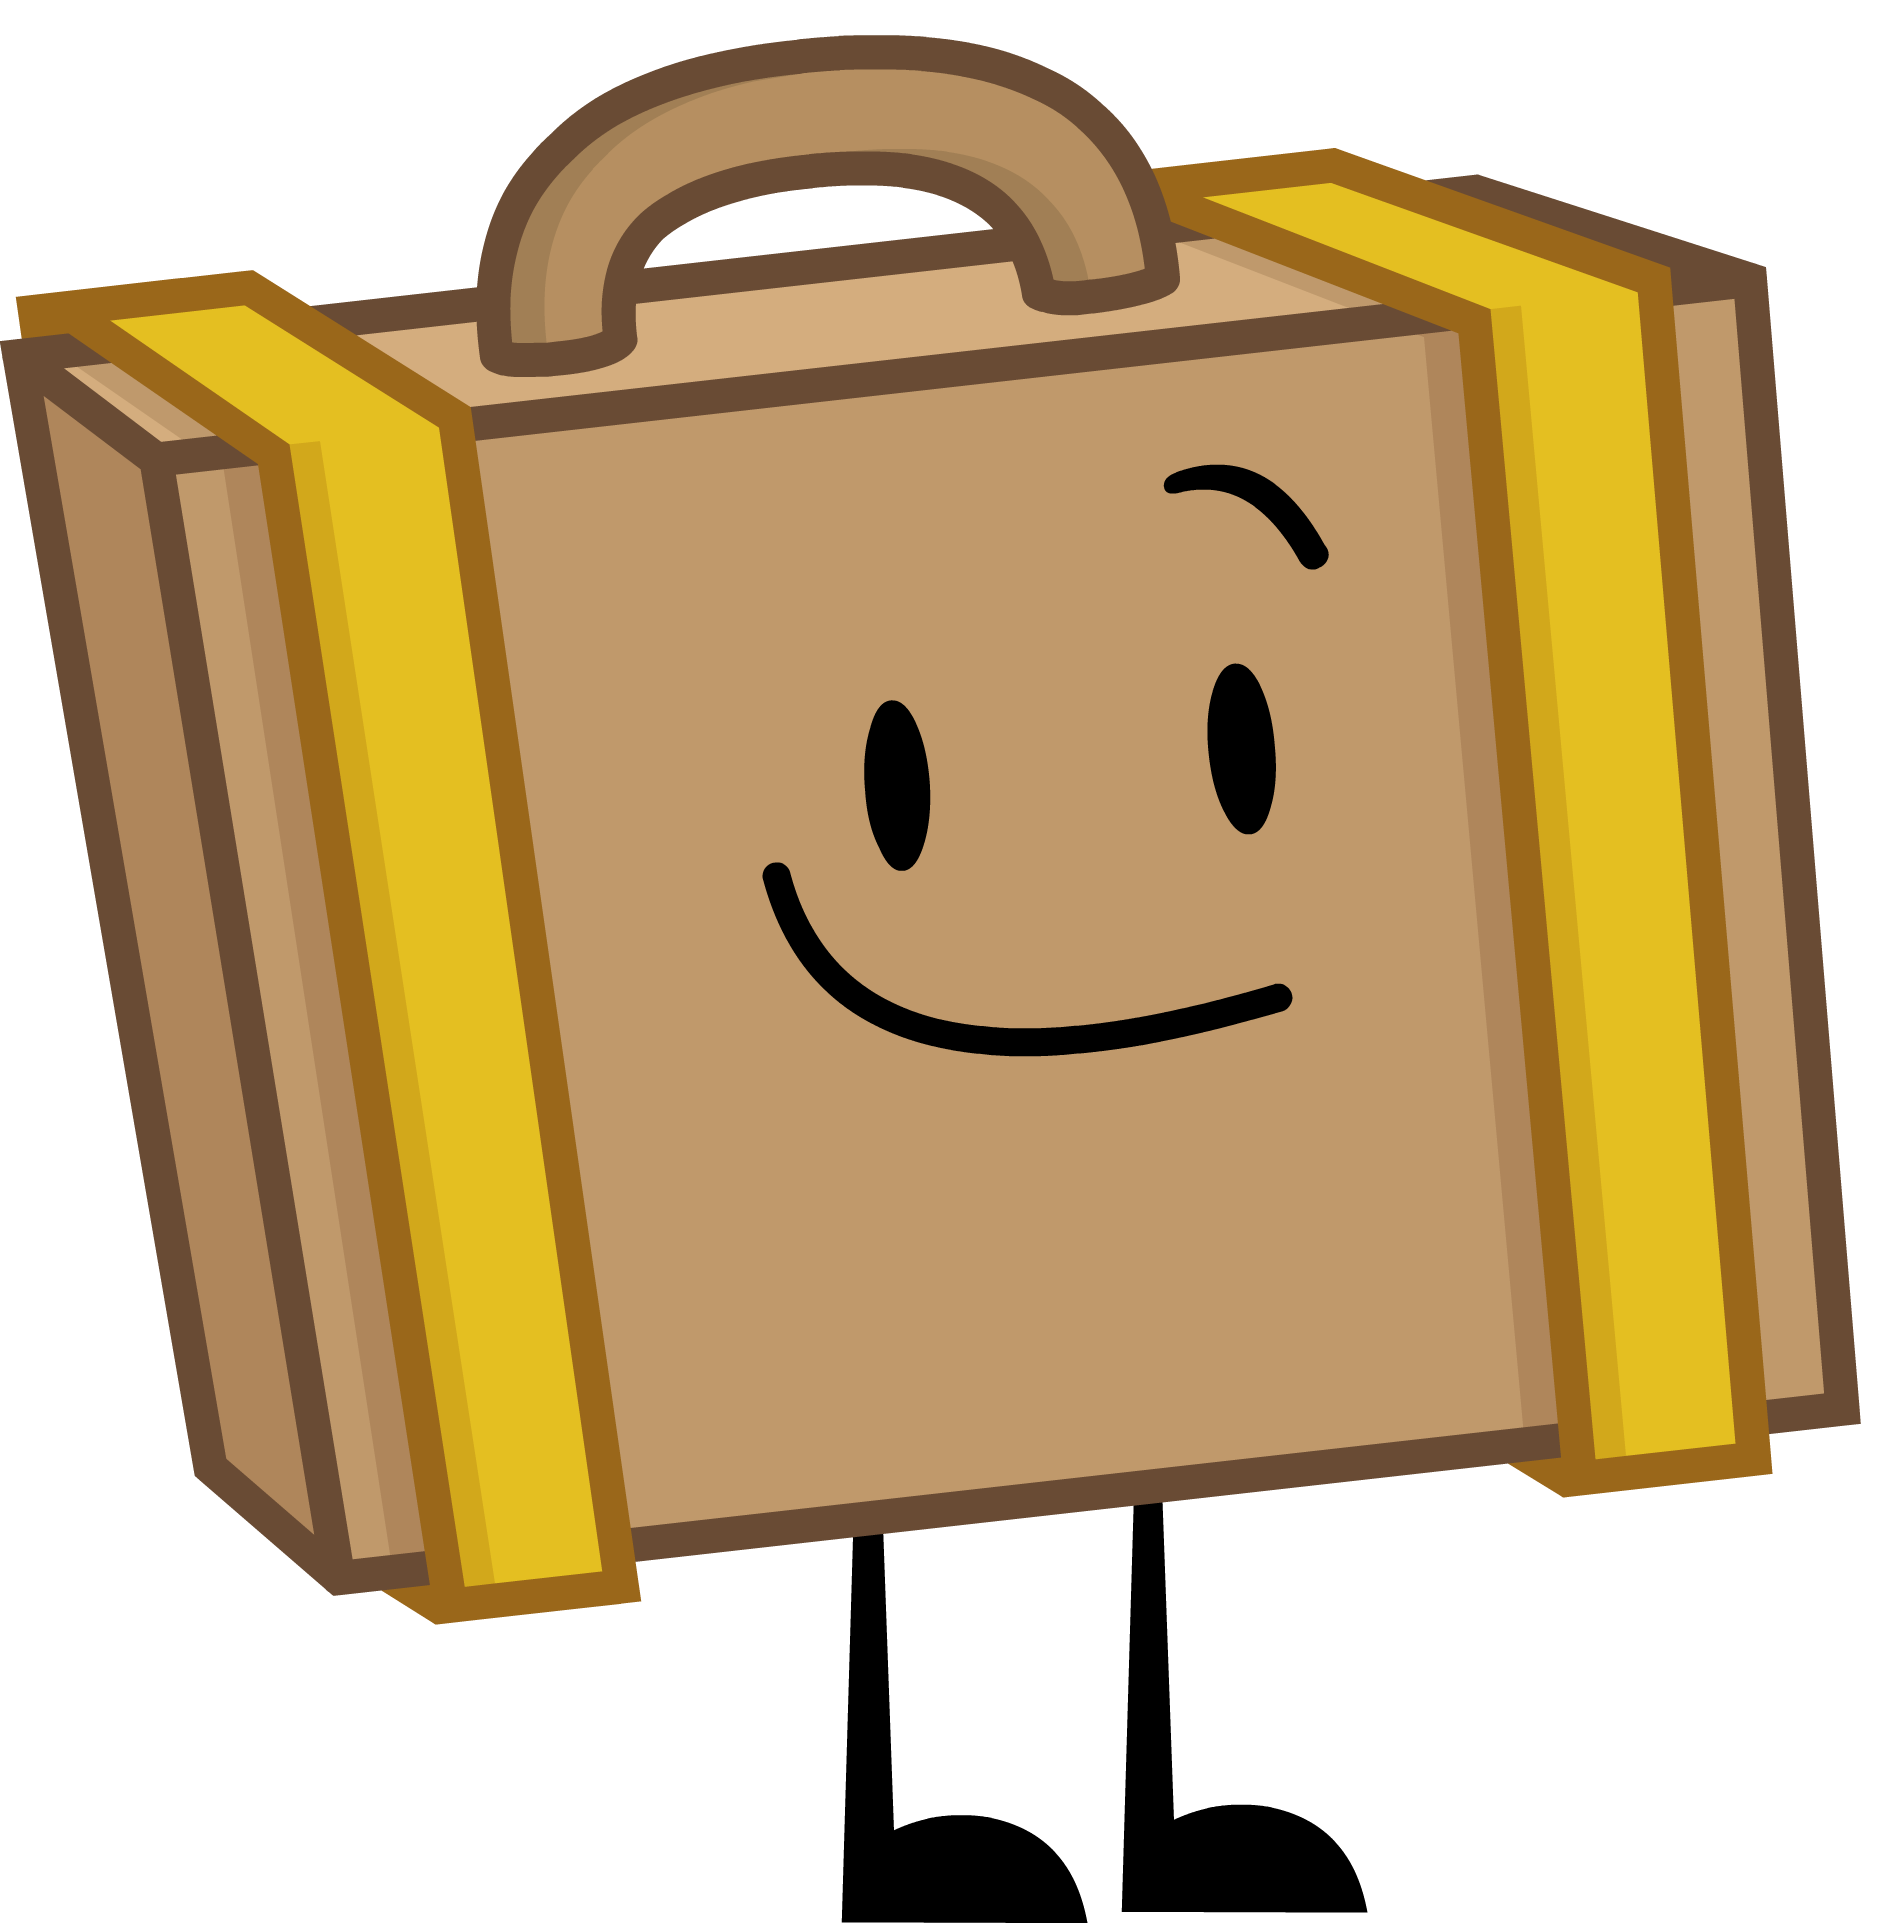 luggage clipart yellow suitcase